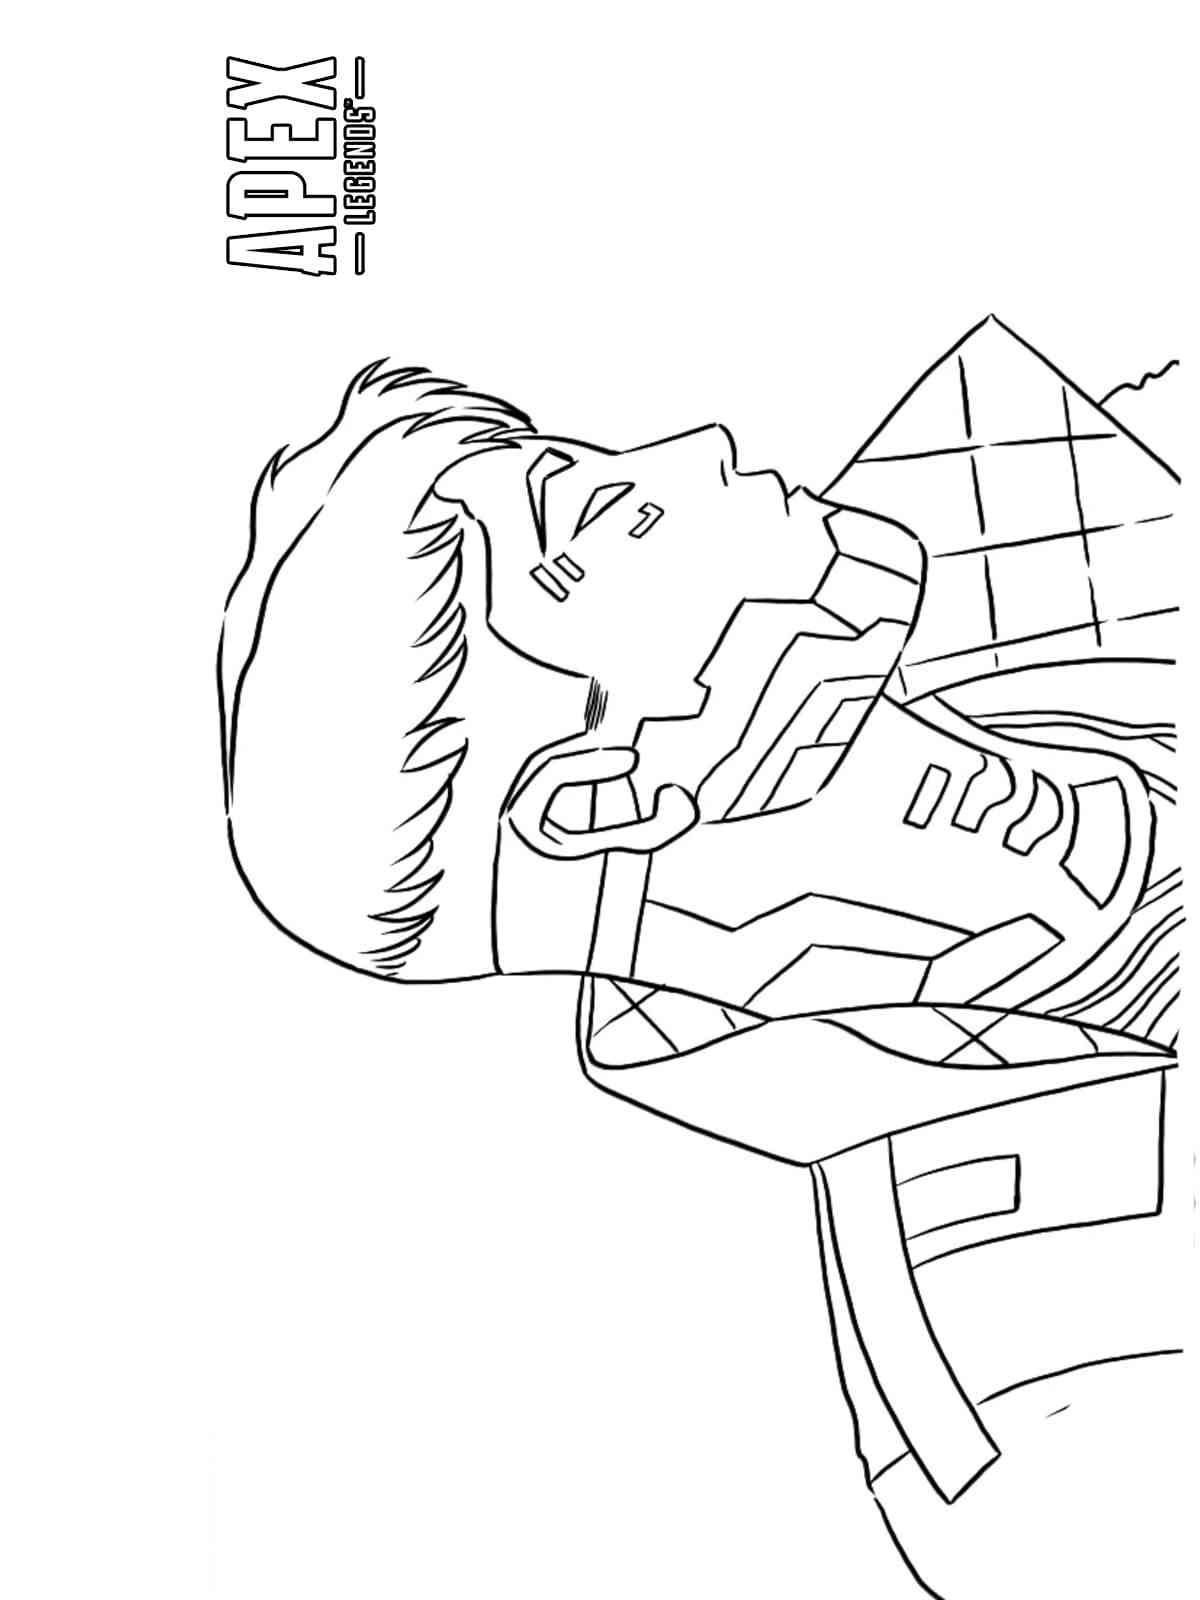 Crypto Apex Legends coloring page